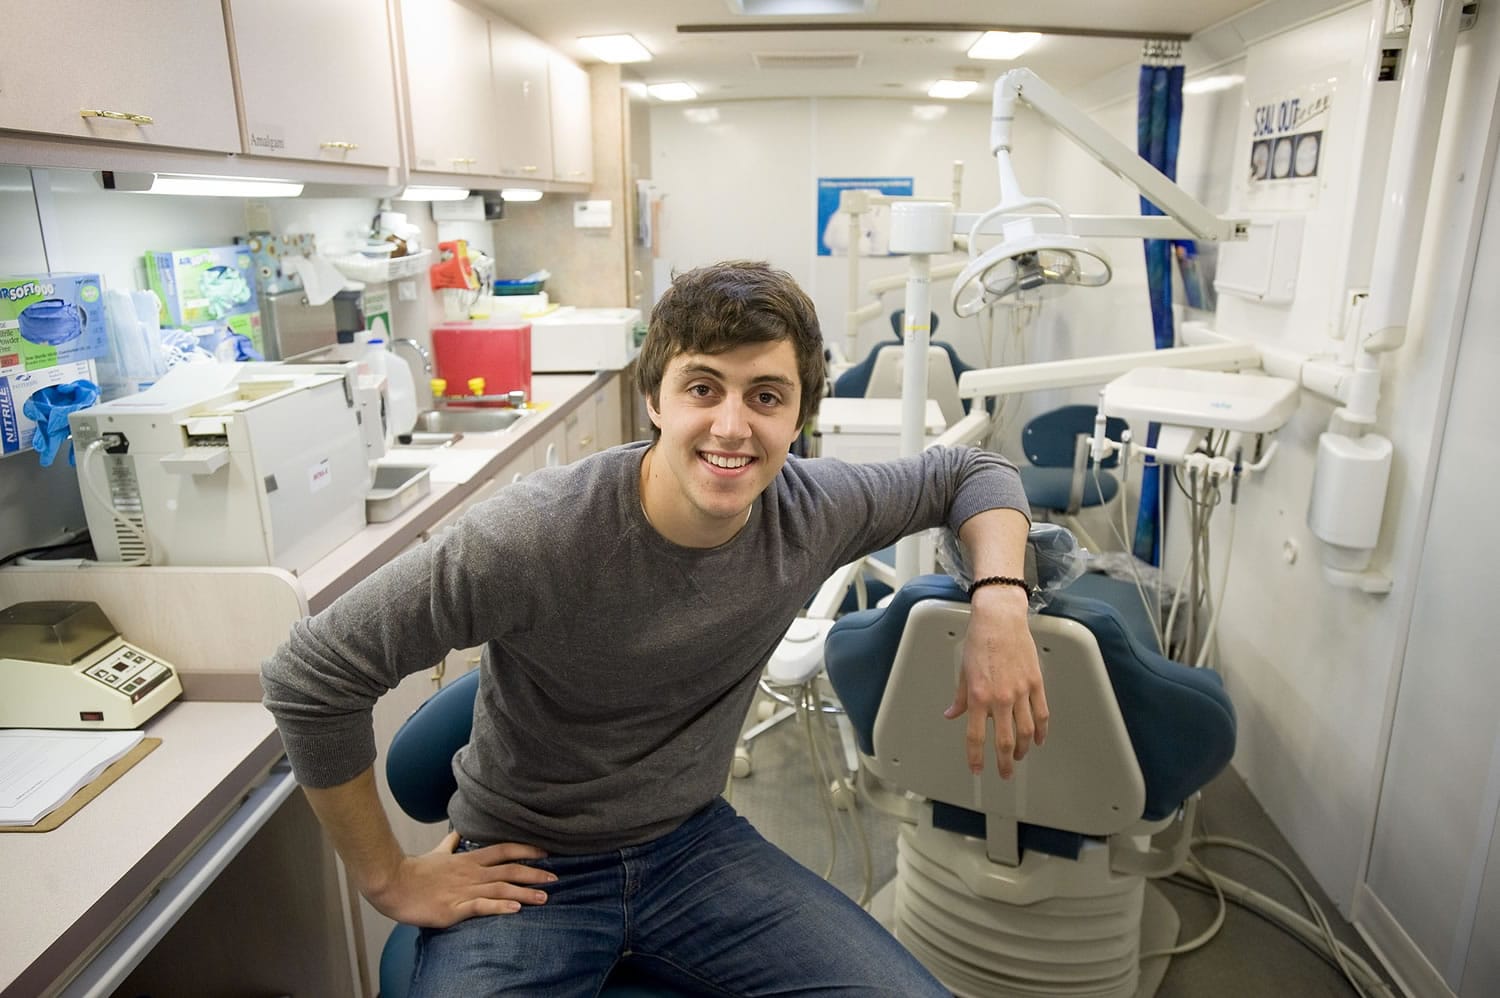 Stephen Hendricks, an Americorp volunteer Stephen Hendricks with the Free Clinic of Southwest Washington, has organized an event where dozens of local dentists will open the doors to their private practices and treat uninsured adult patients free of charge.